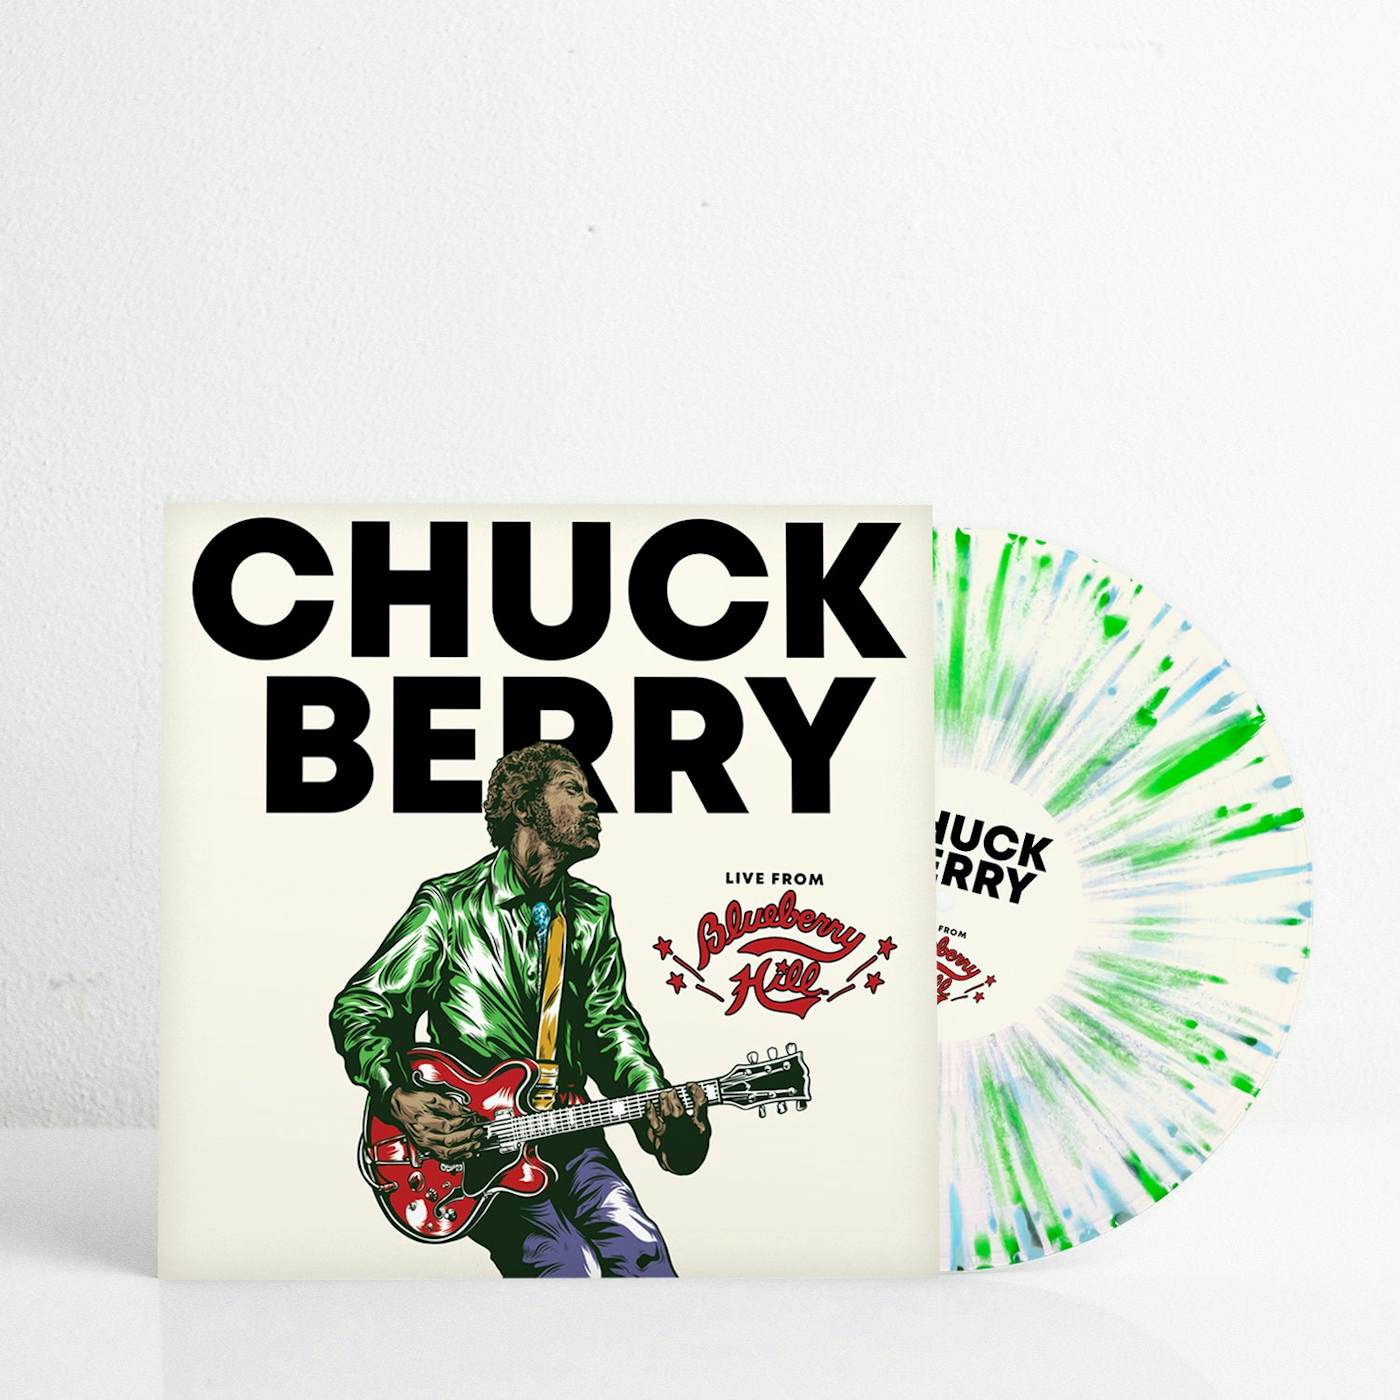 Chuck Berry Live from Blueberry Hill (Limited Edition Vinyl)